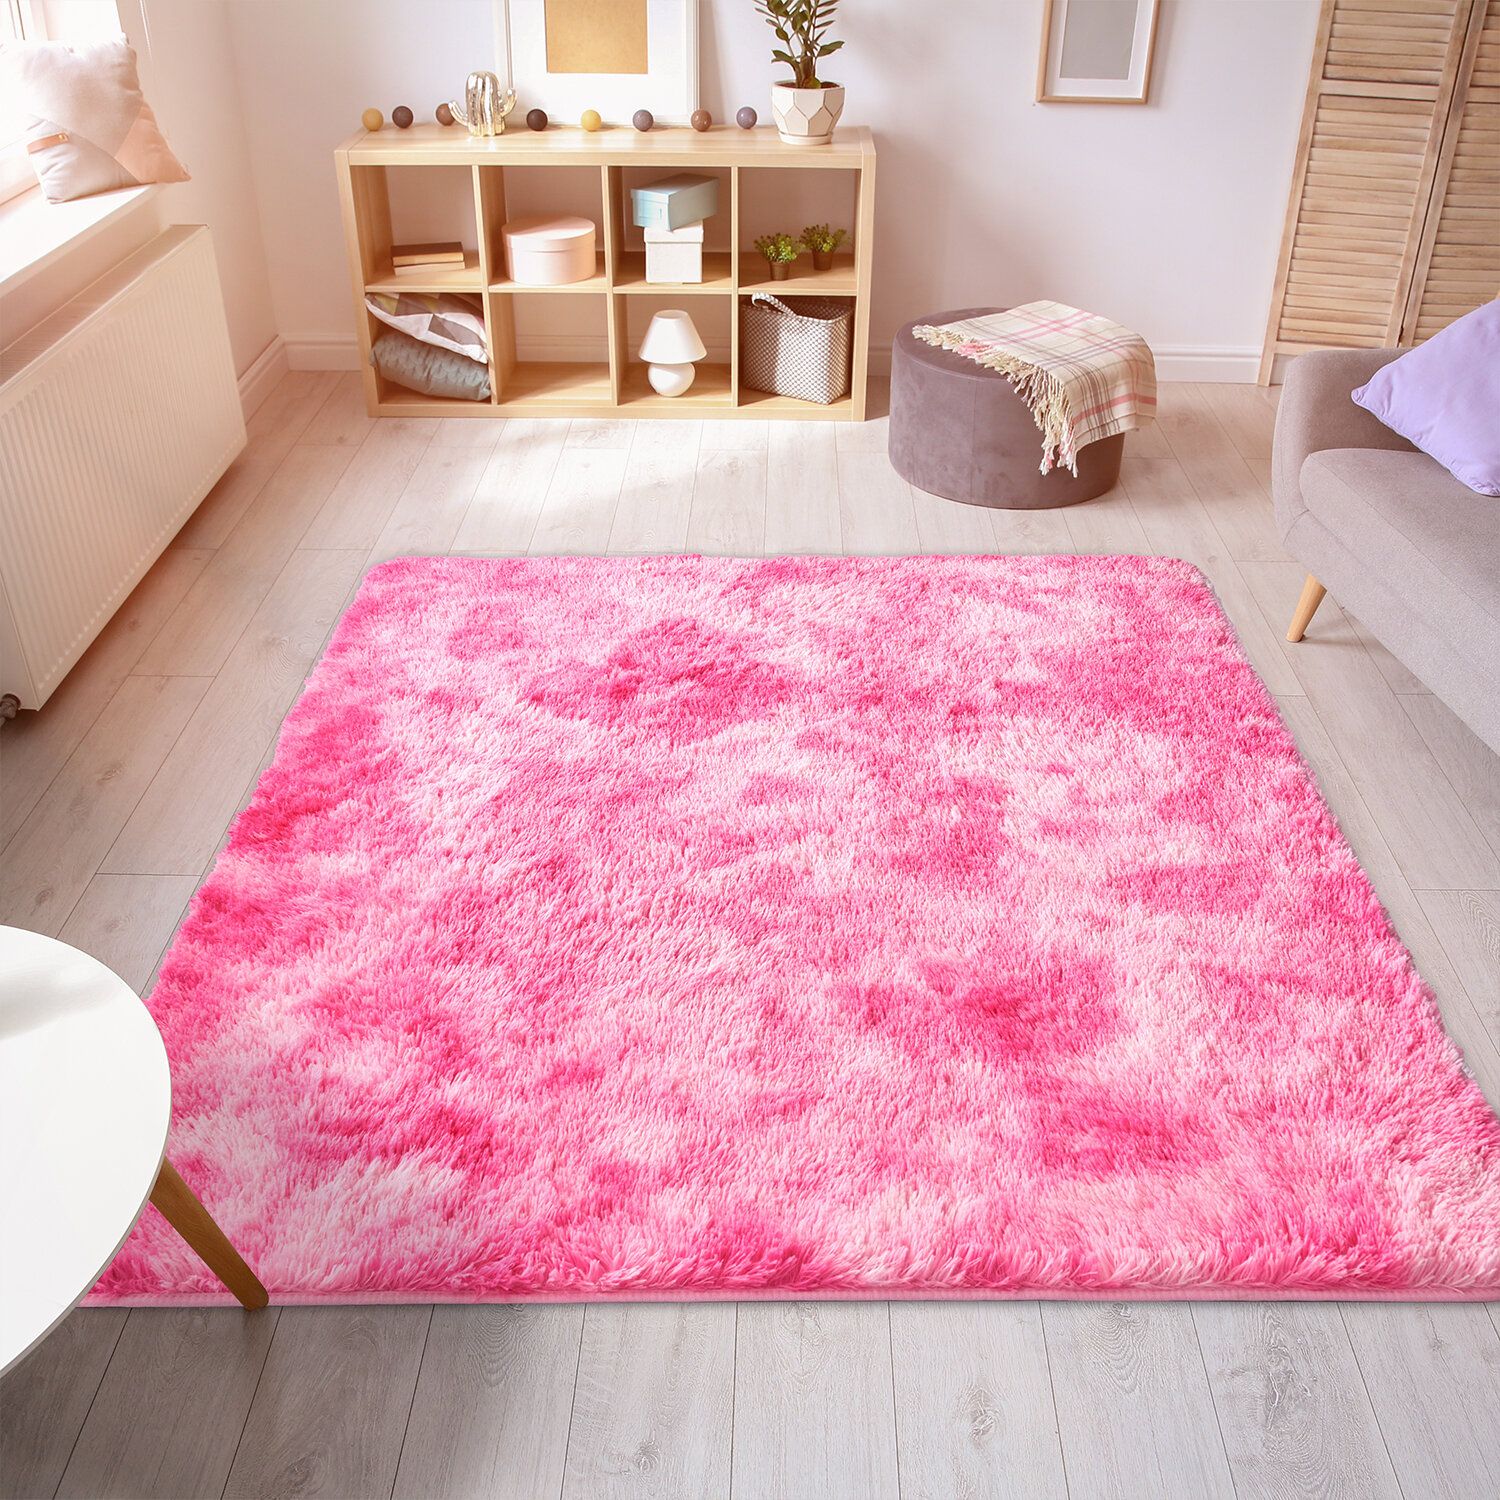 Mercer41 Belgard Machine Tufted Performance Pink Rug & Reviews | Wayfair In Pink Soft Touch Shag Rugs (View 4 of 15)